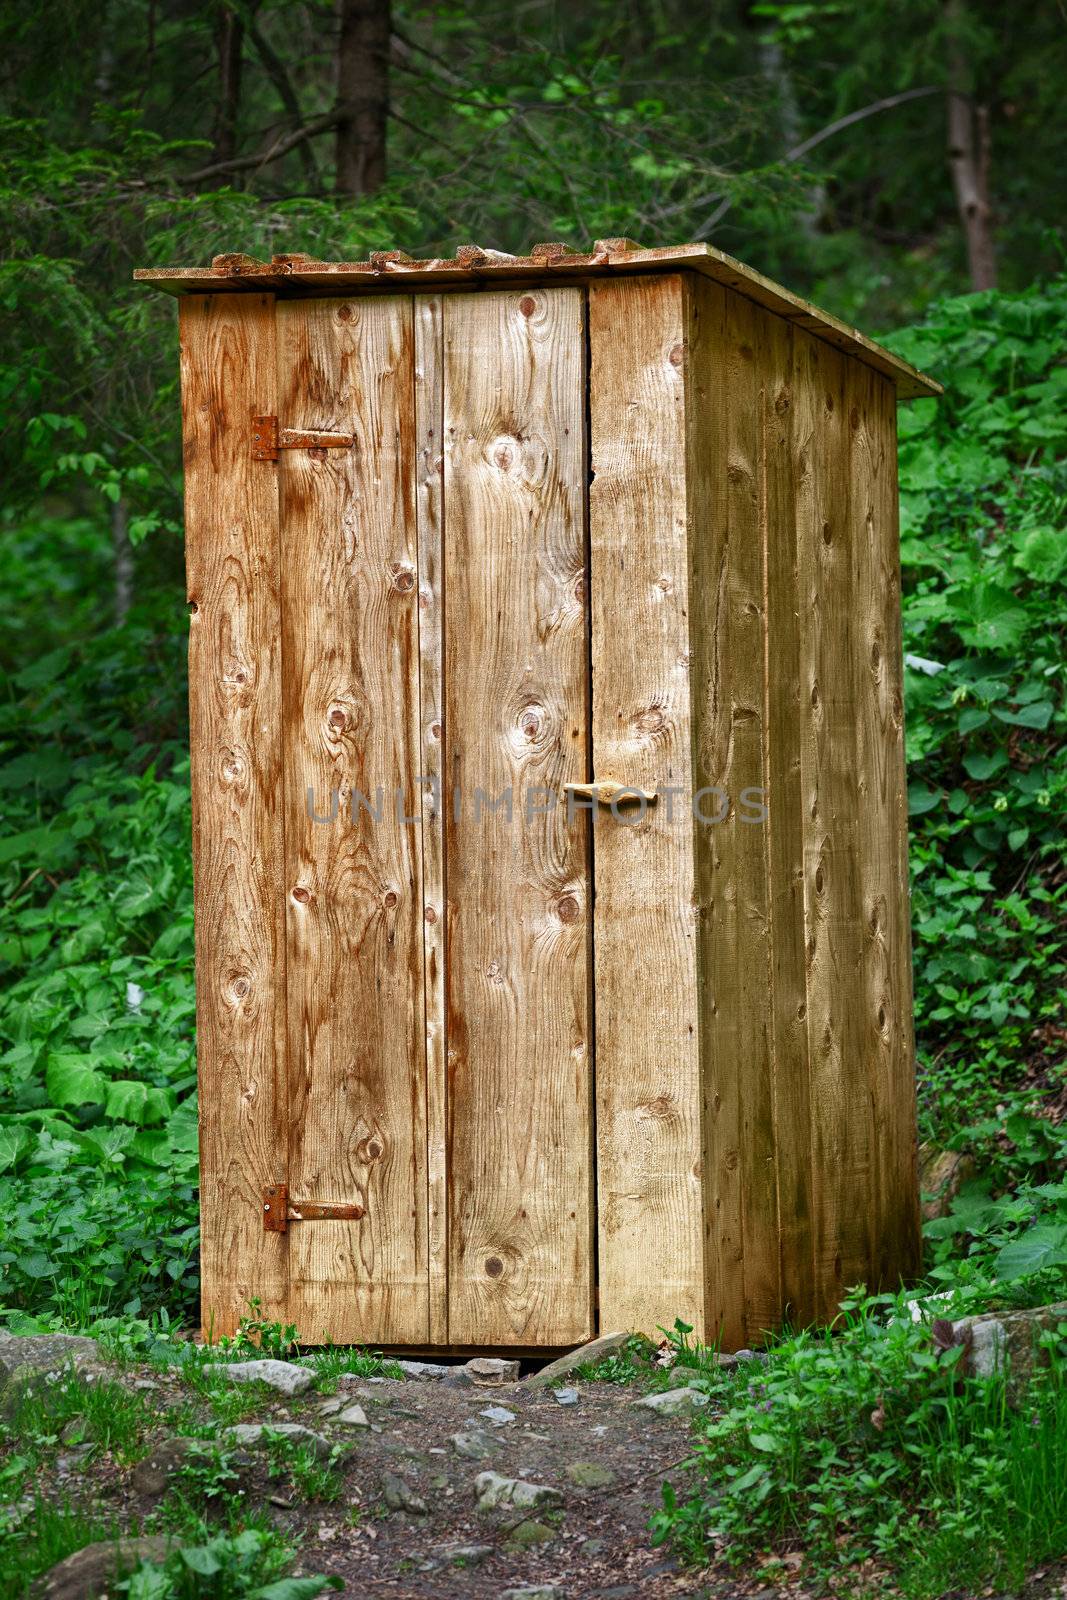 Rustic old wooden toilet in the forest